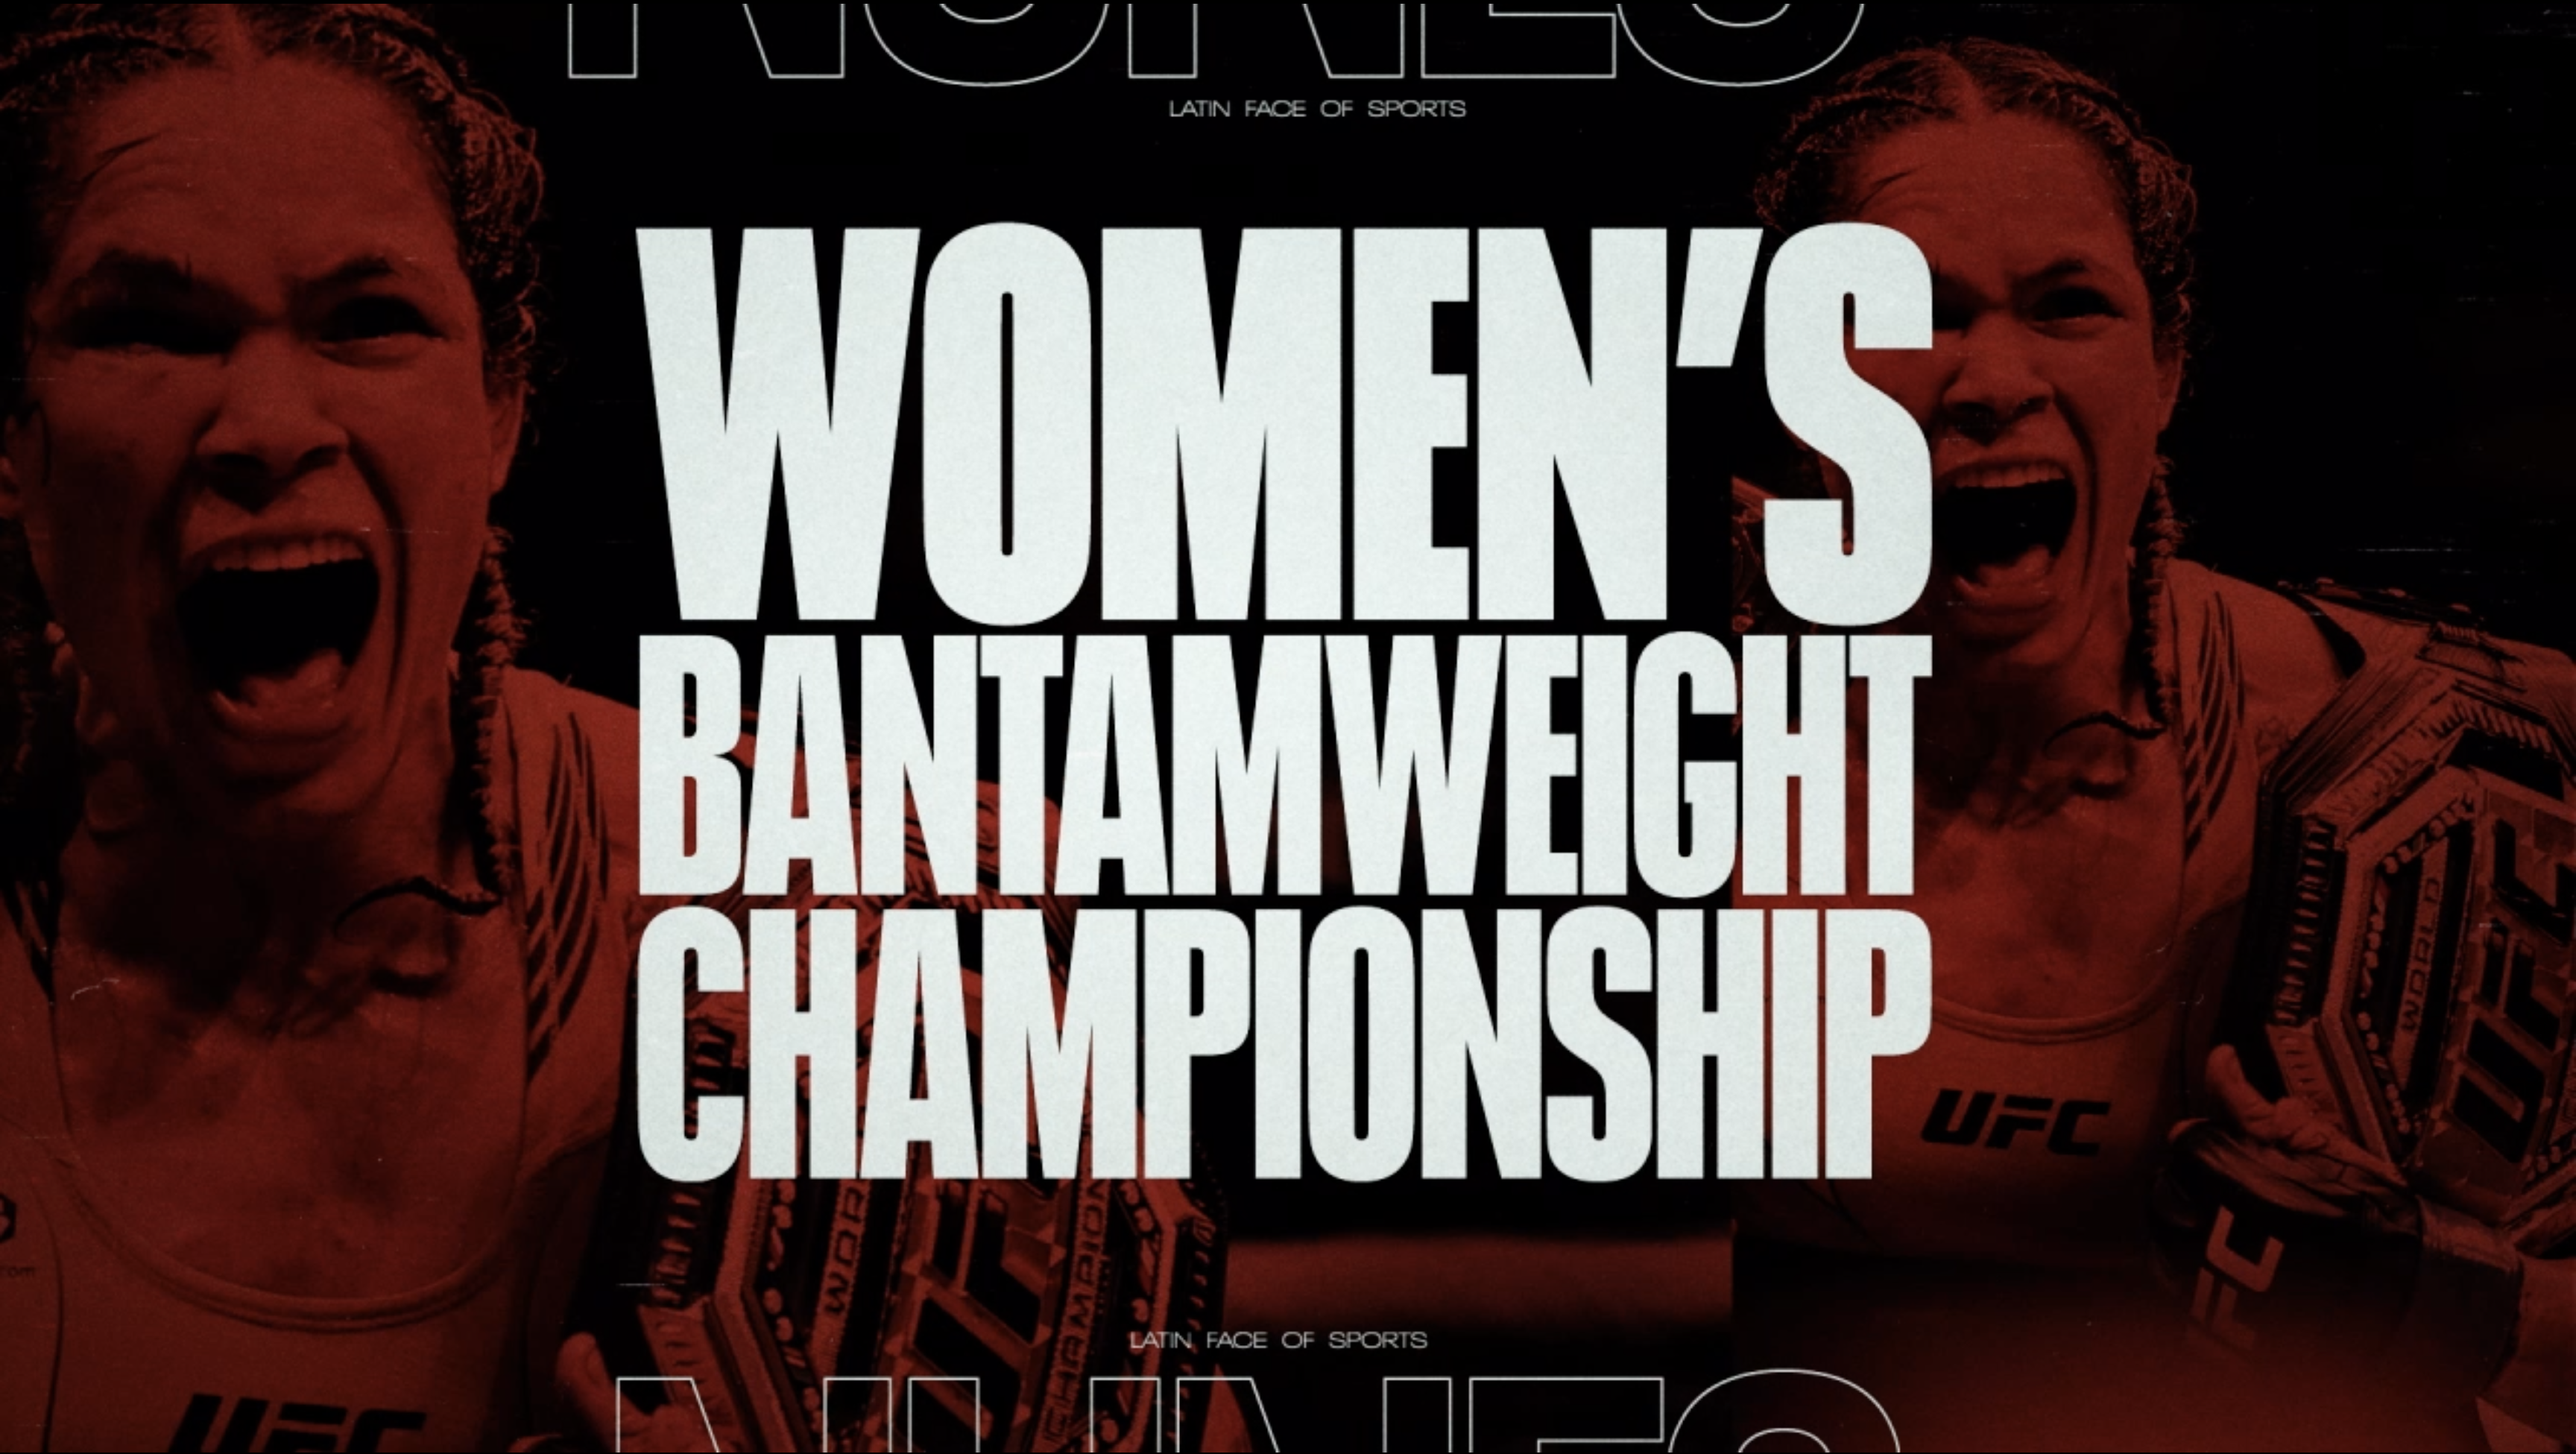 A promotional image for the Women's Bantamweight Championship. The text reads "Women's Bantamweight Championship" in bold letters. Two figures, presumably fighters, are visible behind the text, one on each side. Both appear intense and focused.